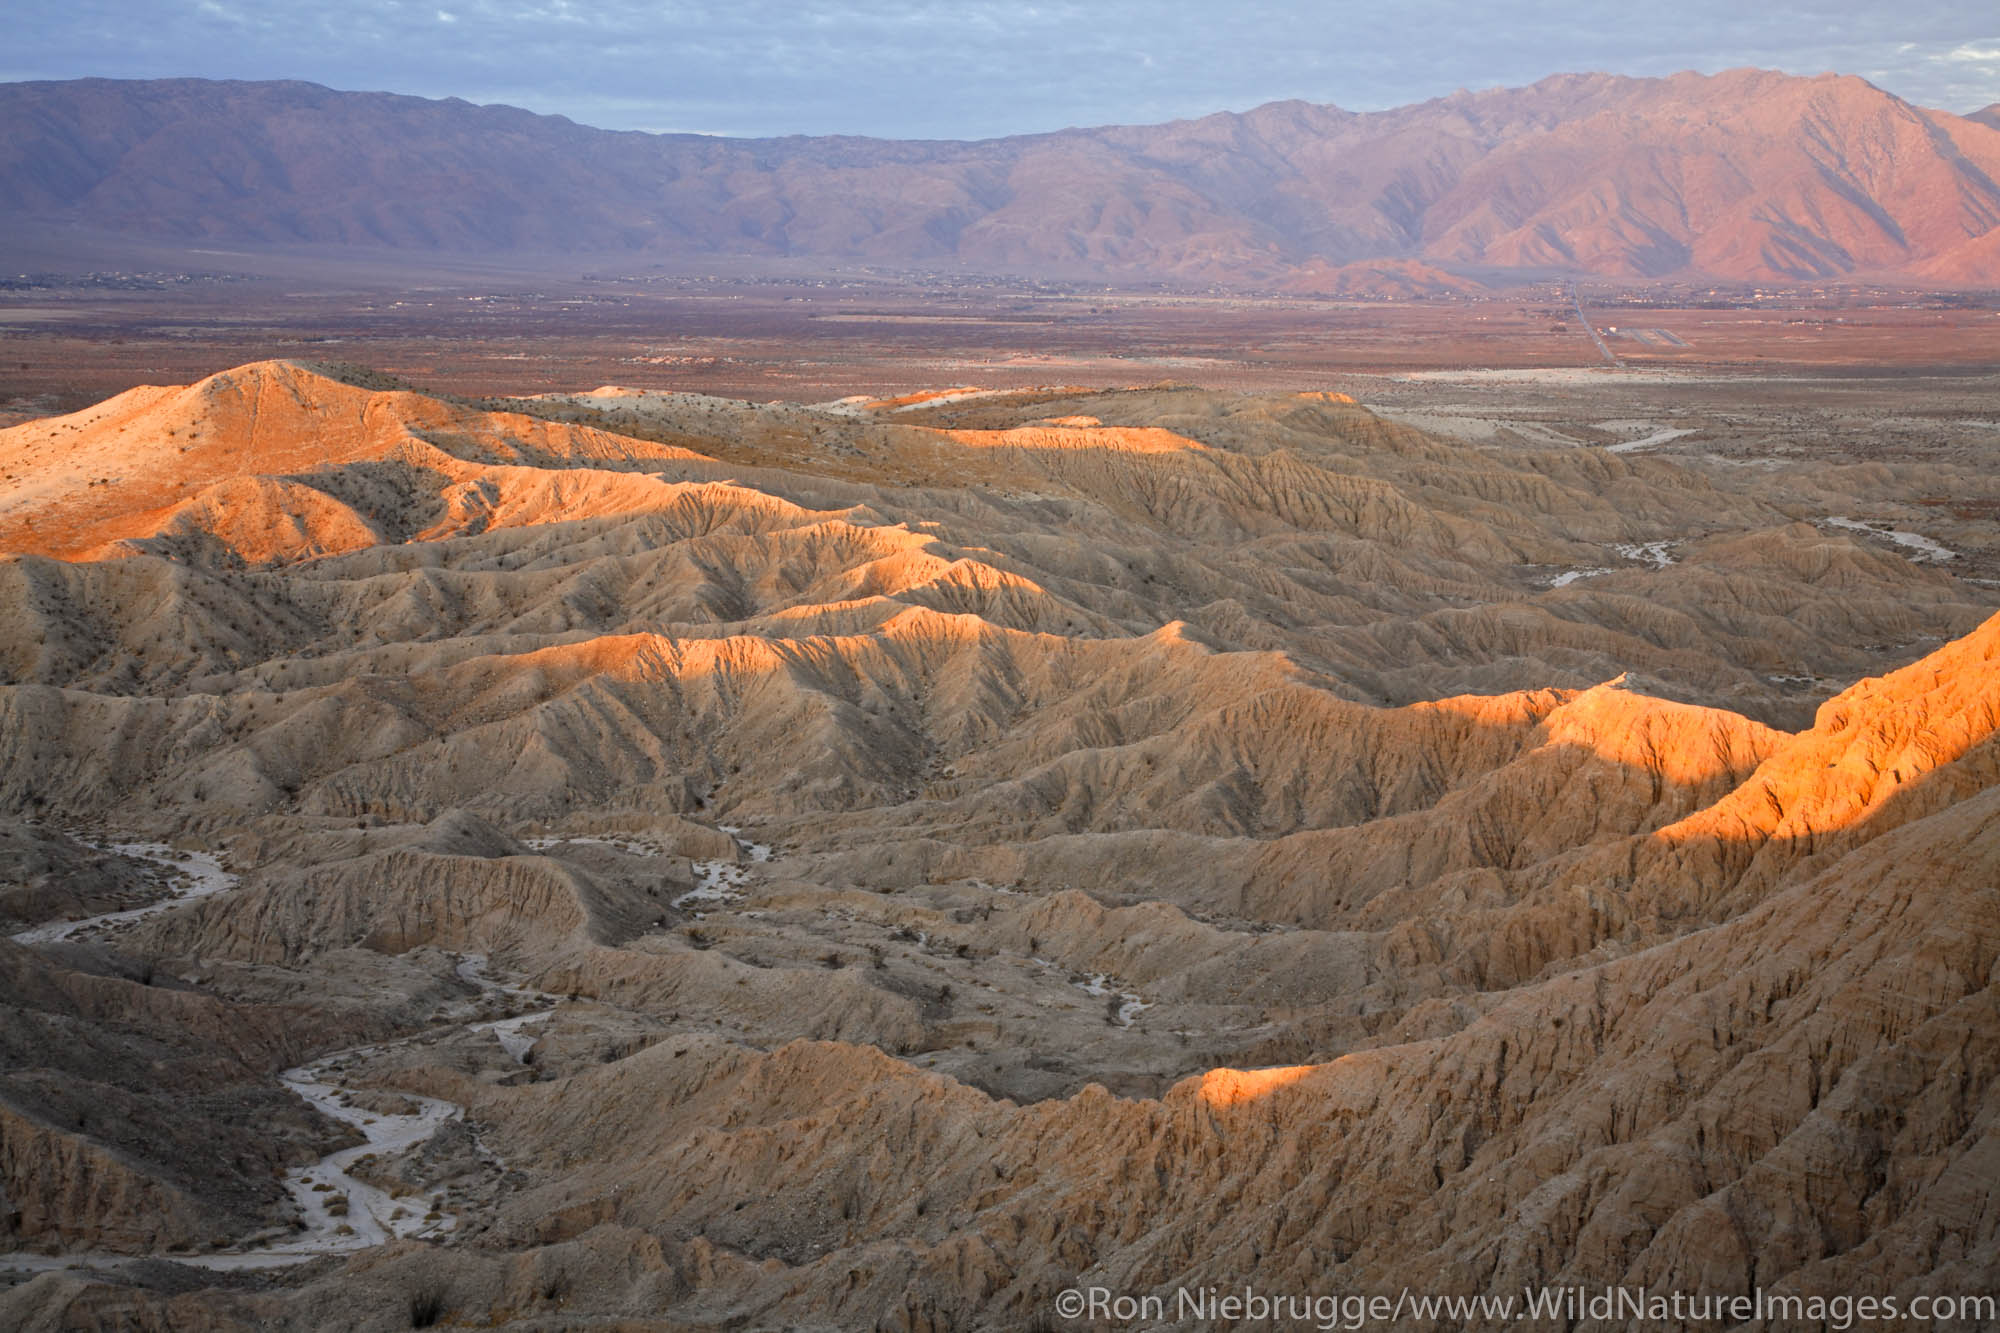 Looking towards Borrego Springs and the Badlands from Font's Point at sunrise, Anza-Borrego Desert State Park, California.